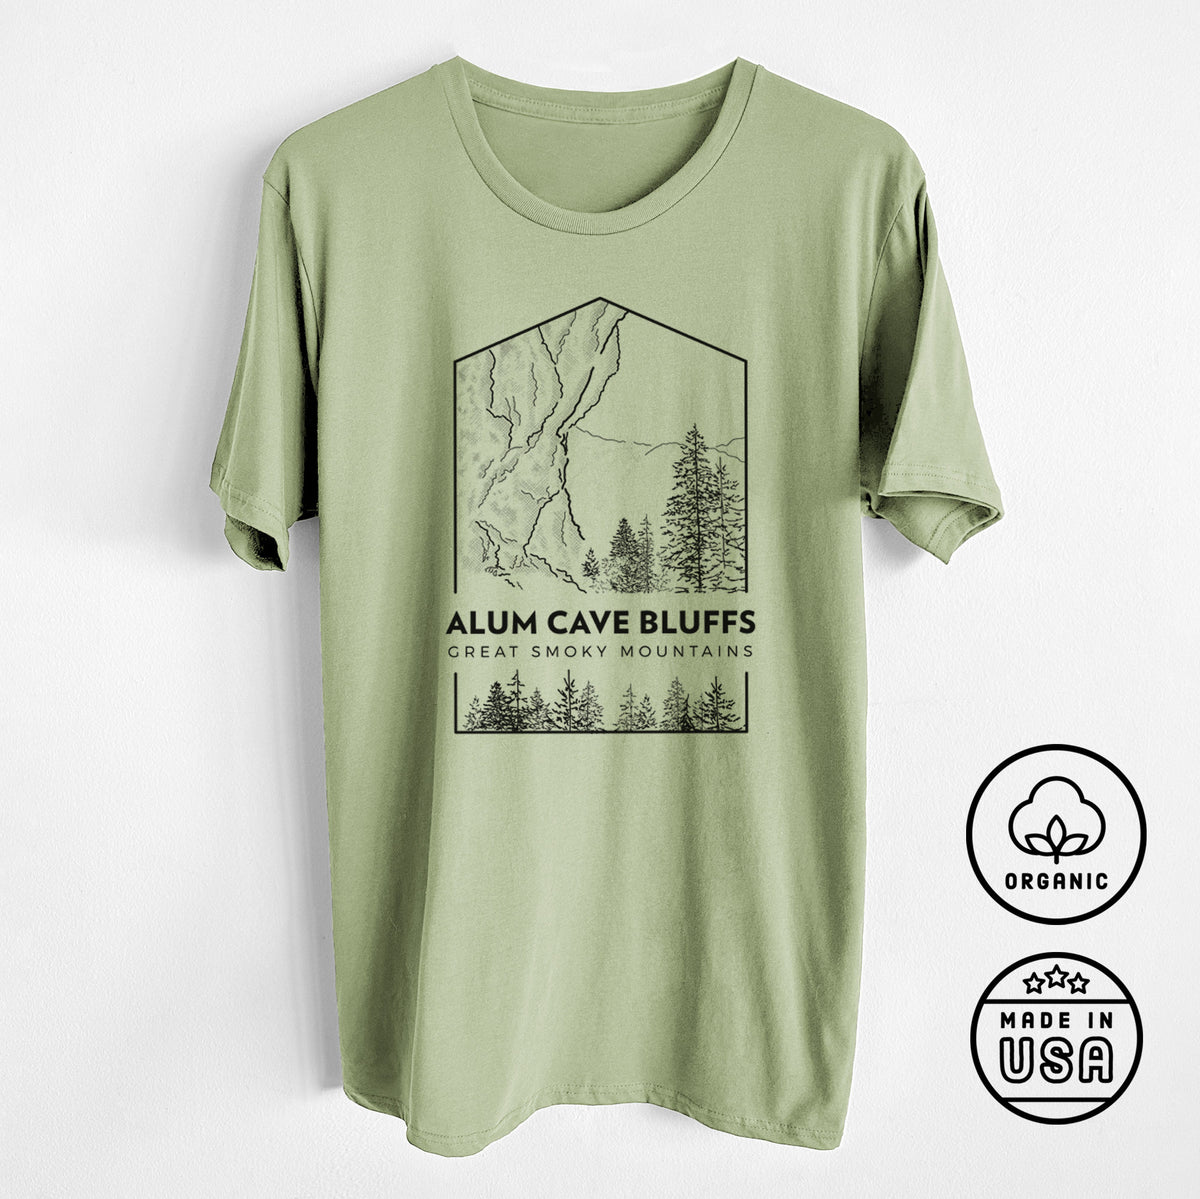 Alum Cave Bluffs - Great Smoky Mountains National Park - Unisex Crewneck - Made in USA - 100% Organic Cotton